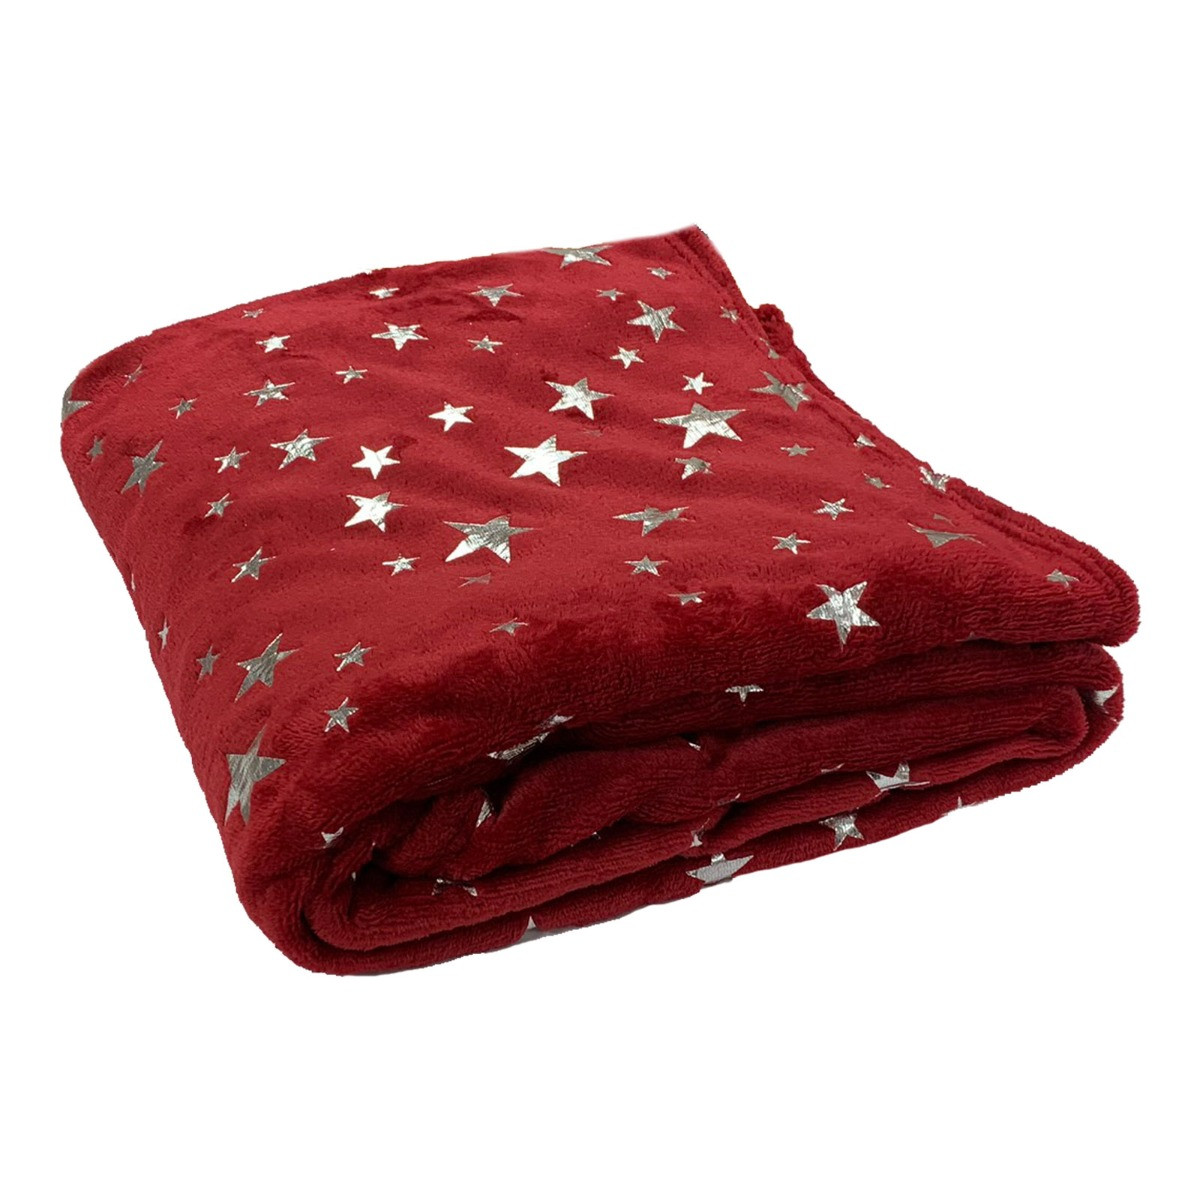 Dreamscene Supersoft Star Throw, Red - 125 x 150cm>